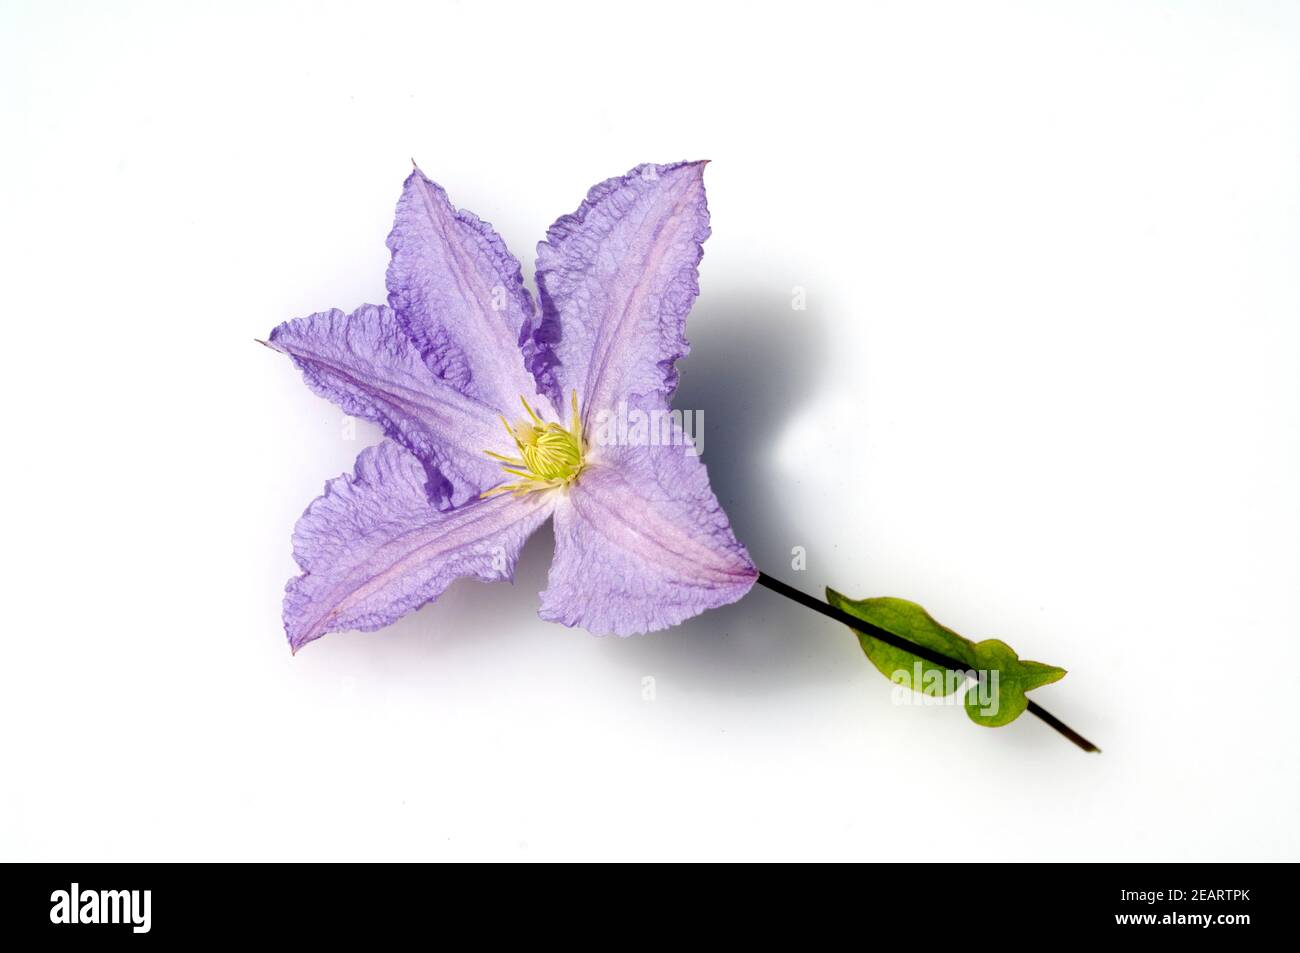 Clematis viticella, Blu, Angelo Foto Stock